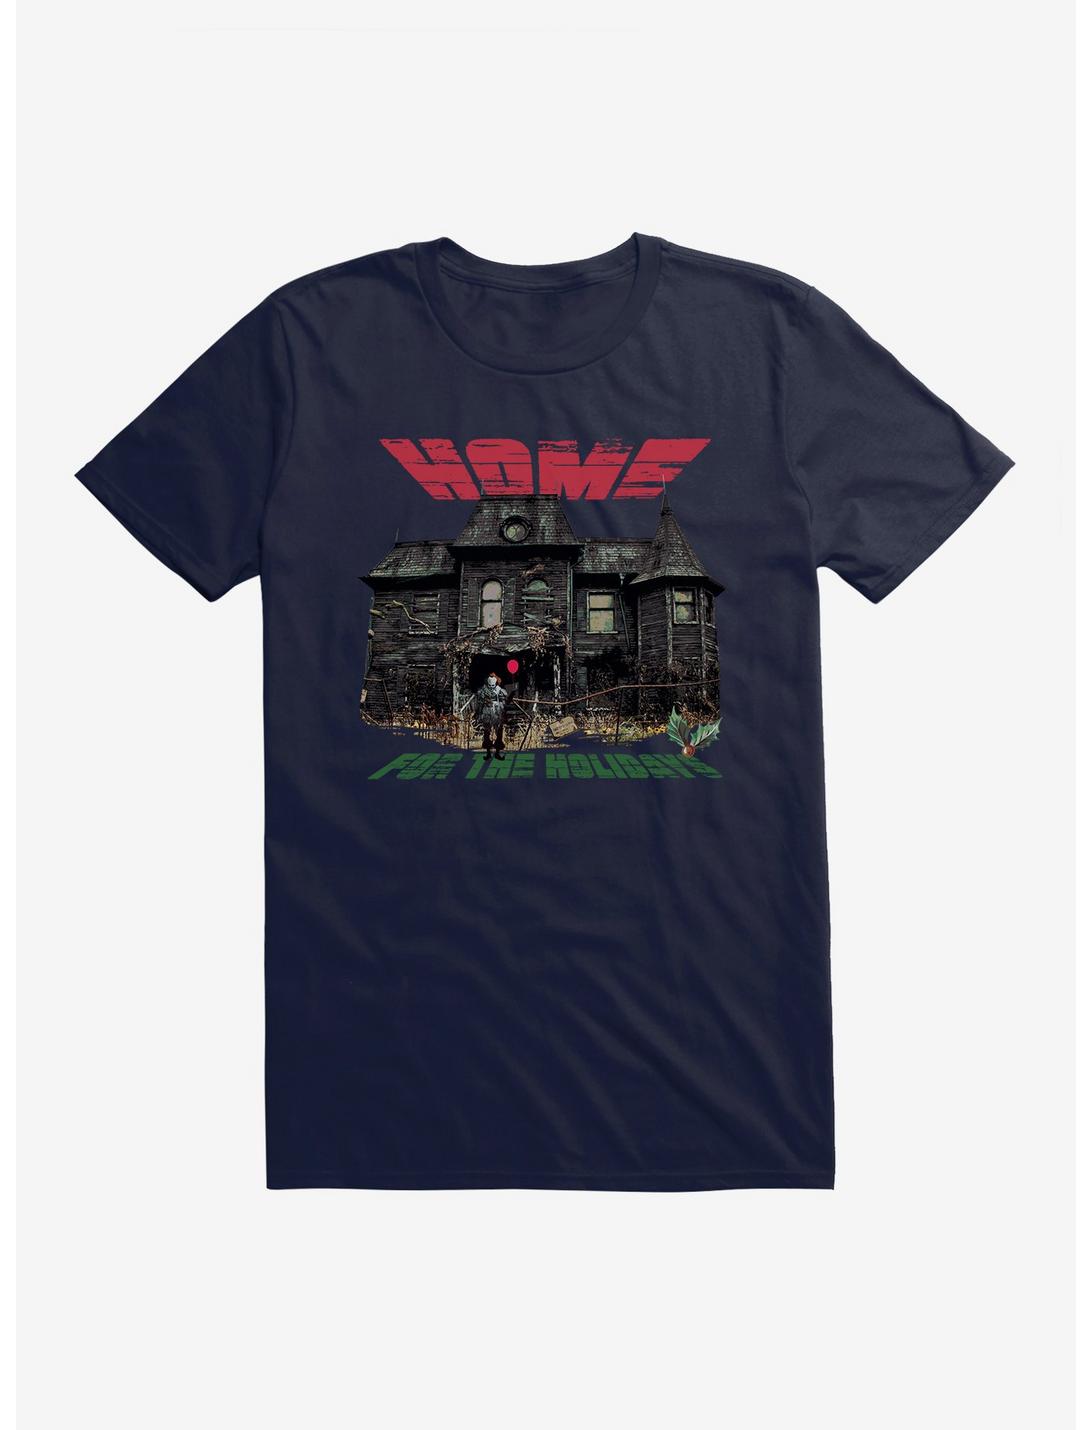 IT Home For The Holidays T-Shirt, NAVY, hi-res